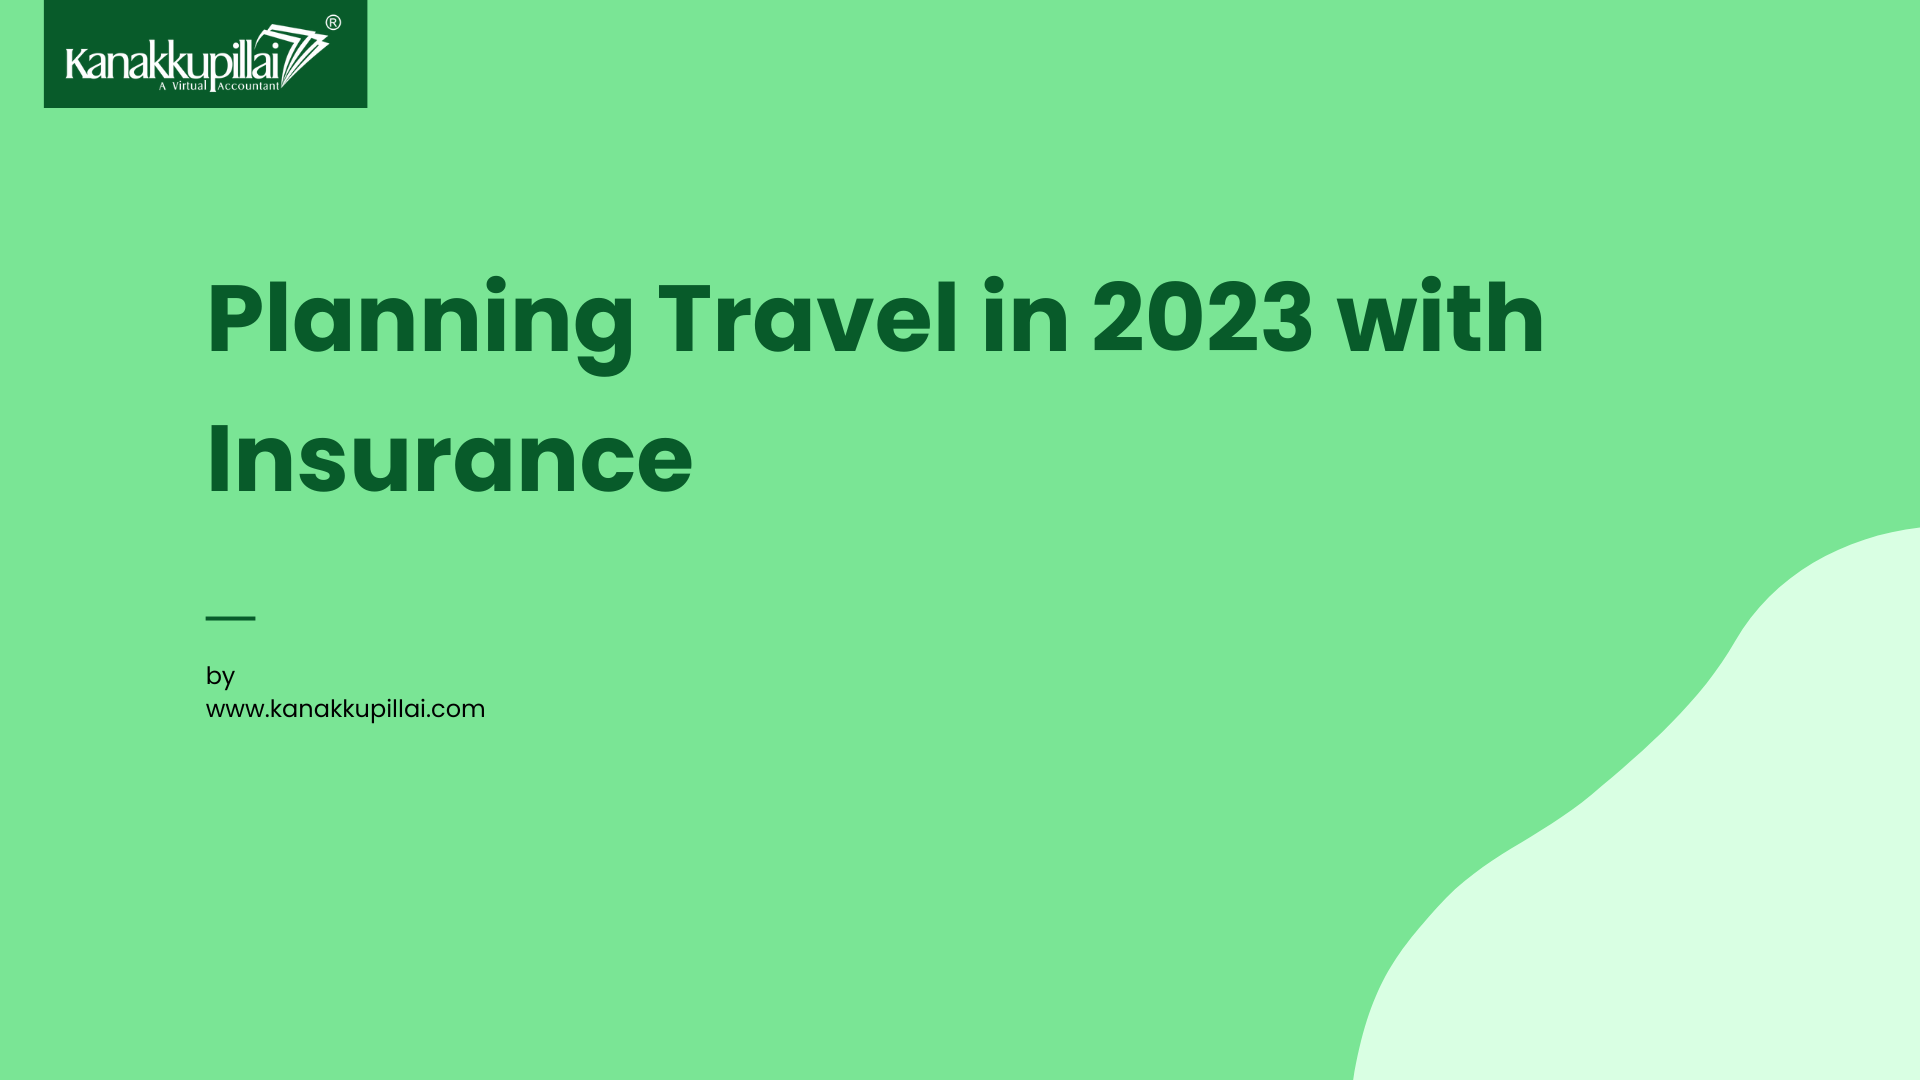 Planning Travel in 2023 with Insurance